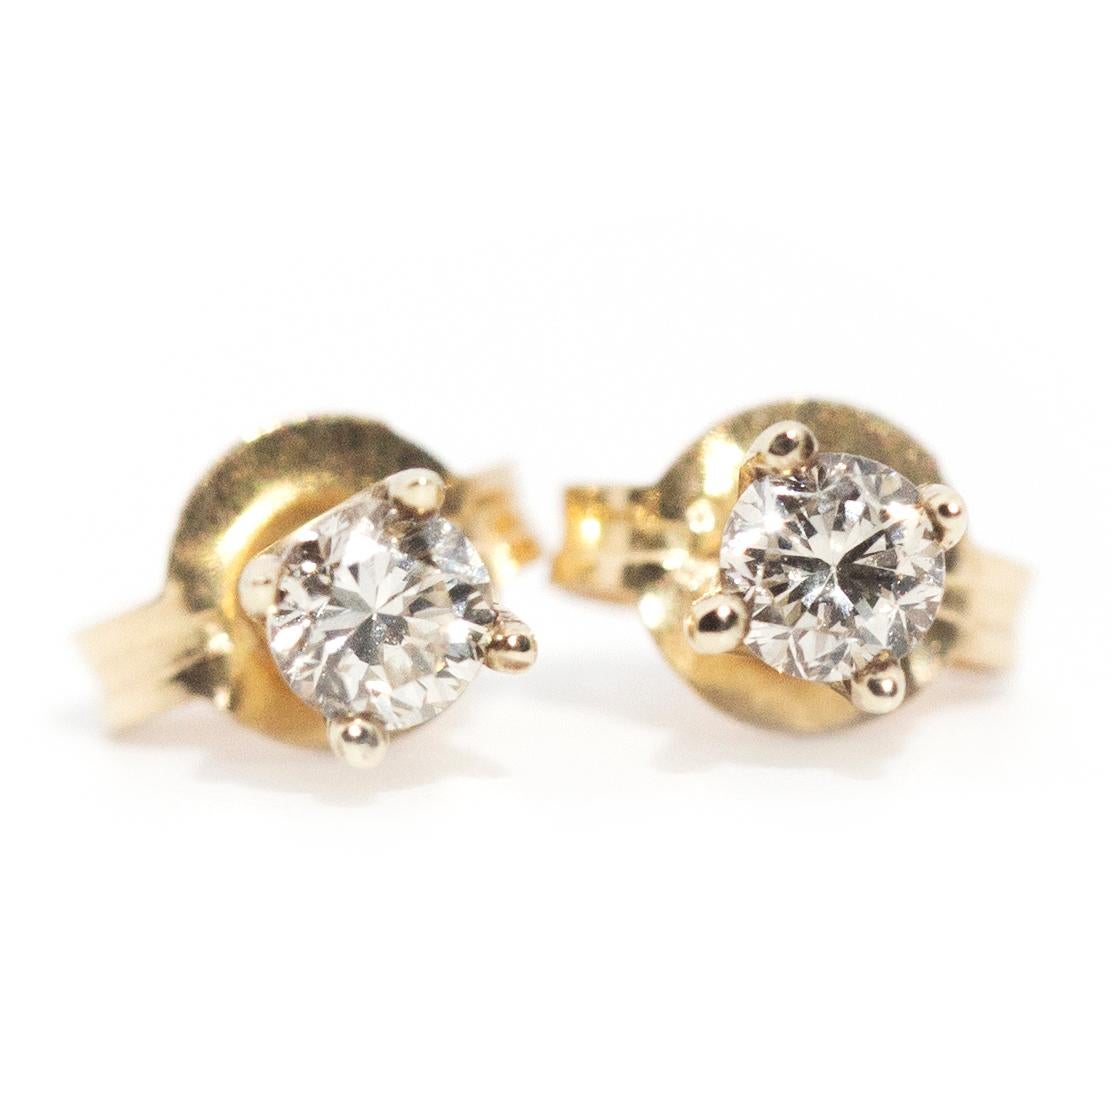 Modern Vintage Circa 1990s 9 Carat White Gold Solitaire Diamond Stud Style Earrings